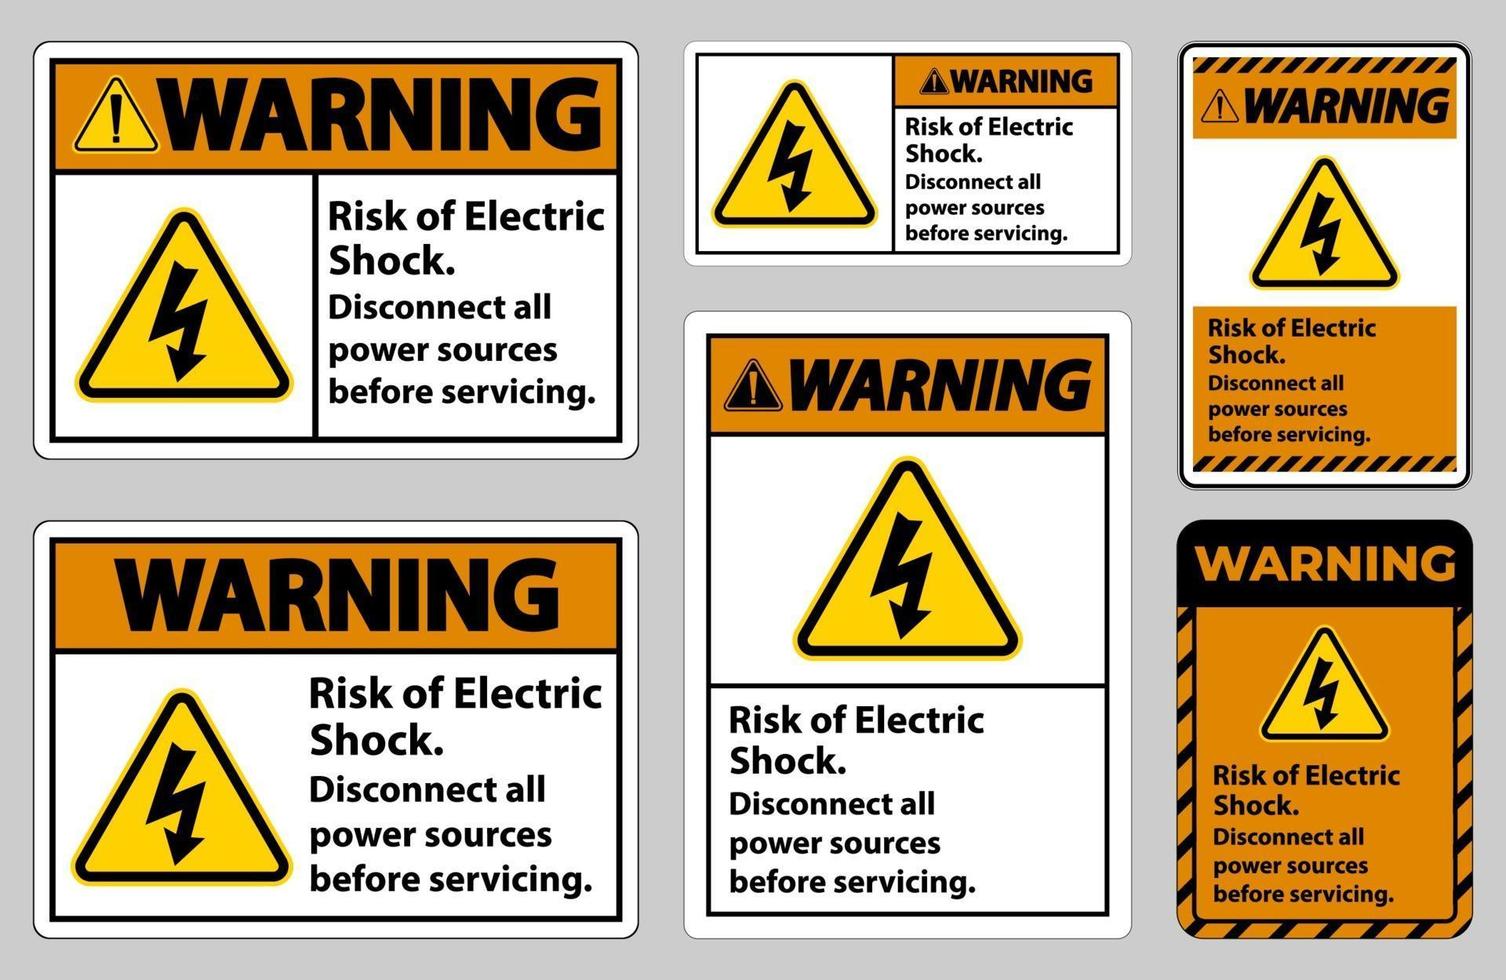 Warning Risk of electric shock Symbol Sign Isolate on White Background vector